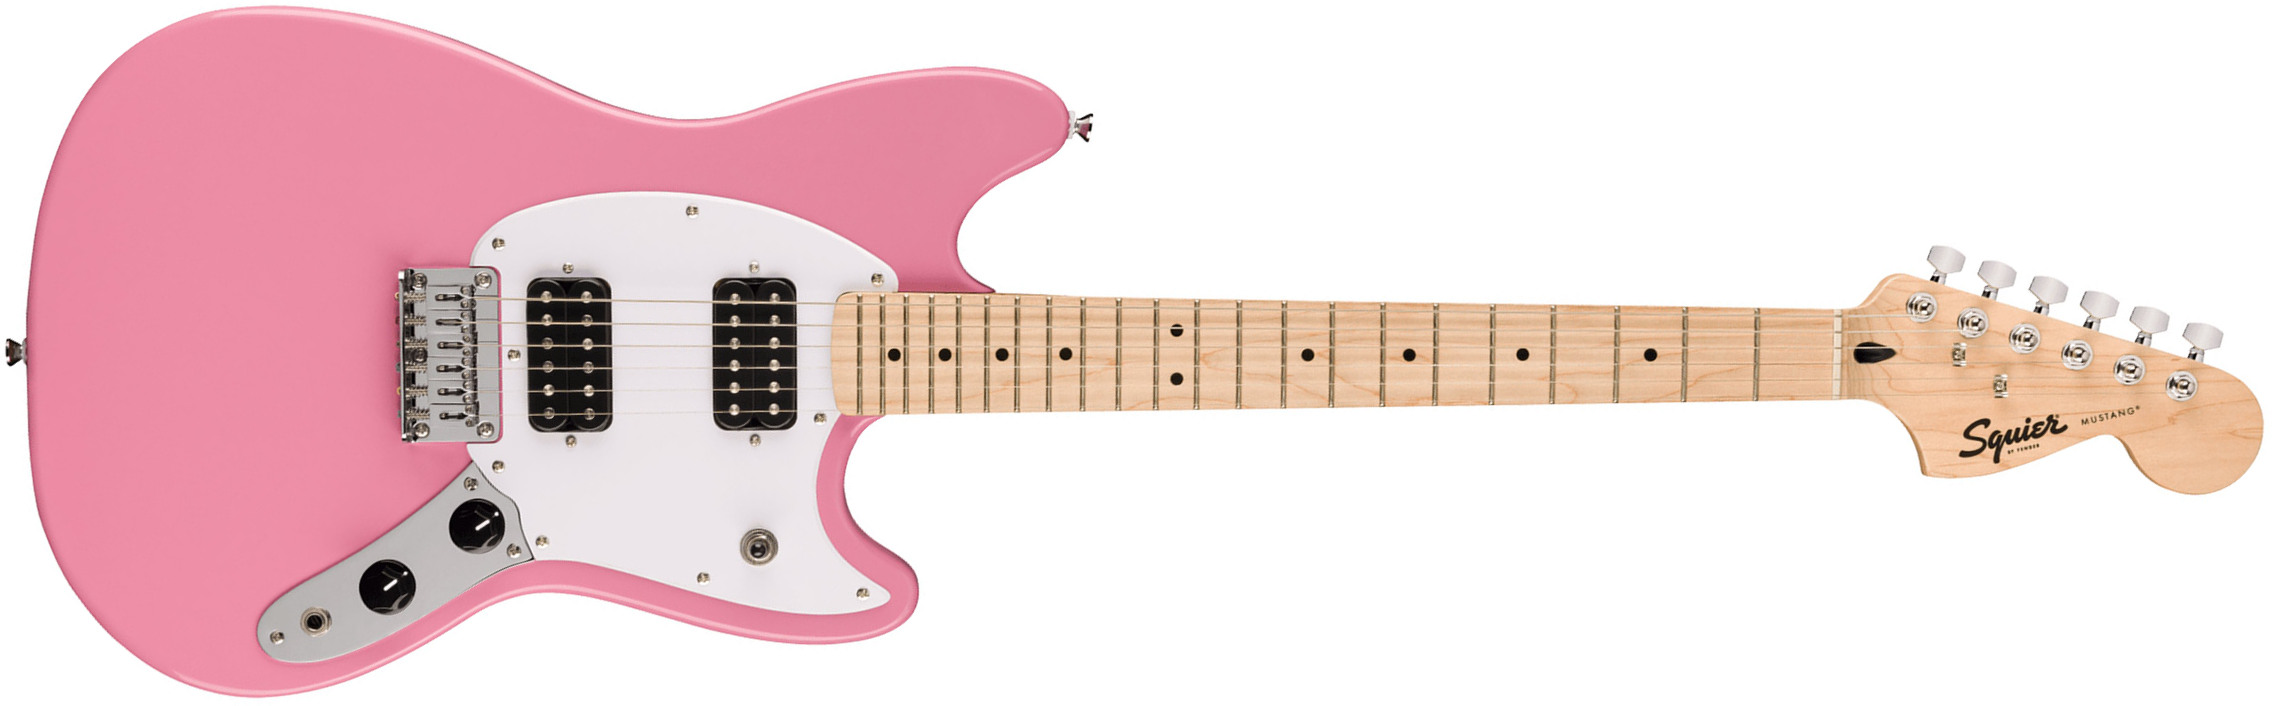 Squier Mustang Sonic Hh 2h Ht Mn - Flash Pink - Retro-Rock-E-Gitarre - Main picture